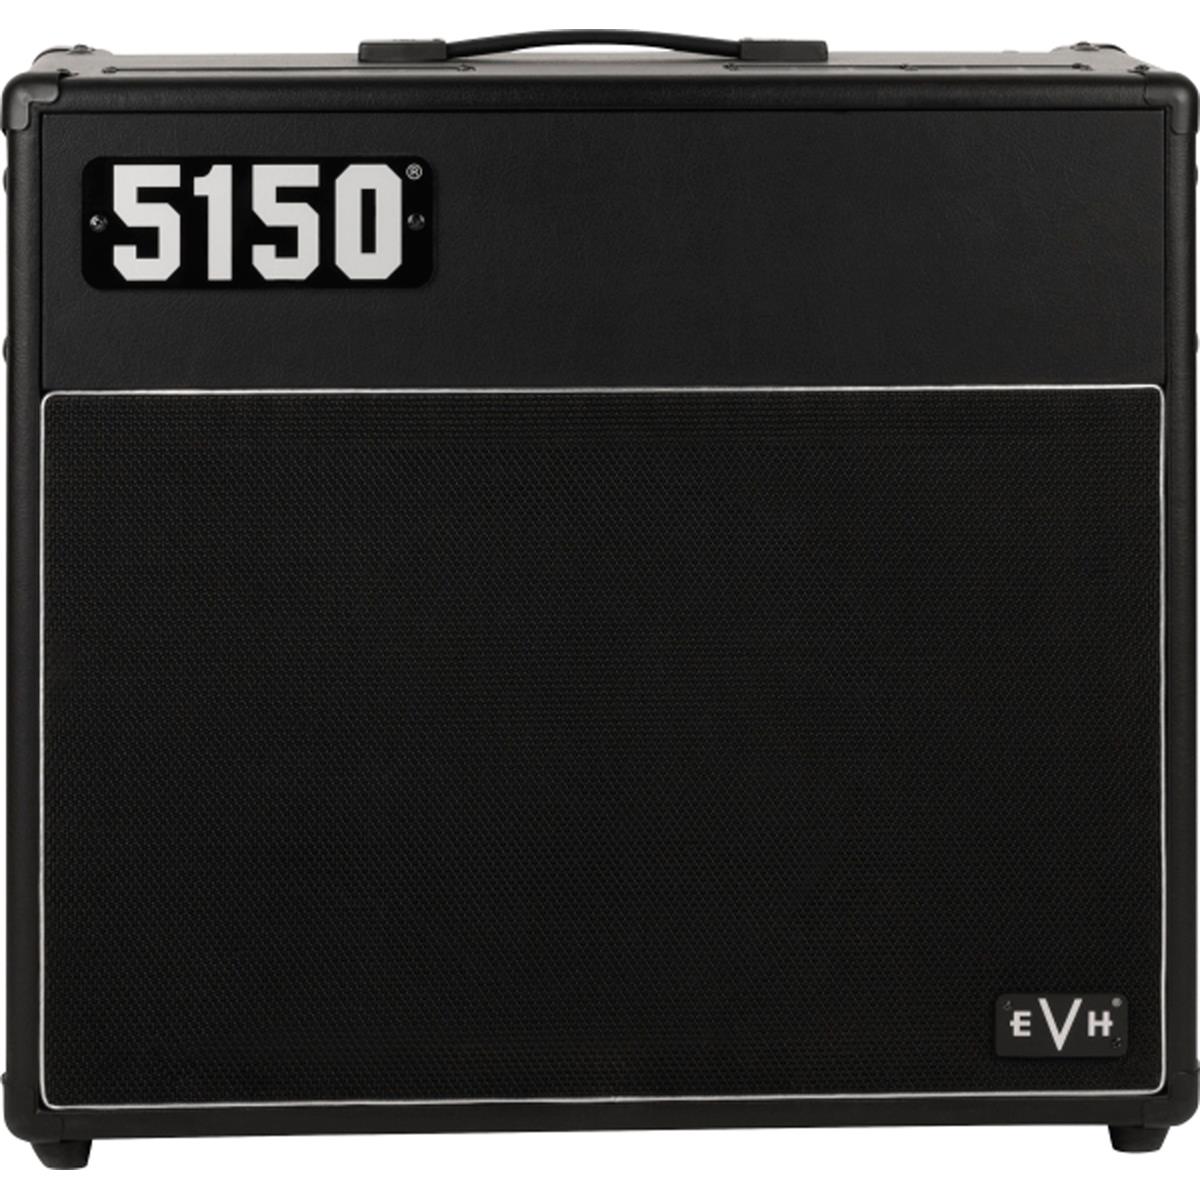 EVH 5150 Iconic Series 40W 1x12" Guitar Combo Amplifier, Black The EVH 5150 Iconic Series satisfies the needs of gigging and recording guitarists craving that pure and powerful EVH tube tone, but at a more affordable price. Evolving from the revered EVH 5150III amplifiers, the Iconic Series delivers the searing sound and growling gain that the late-Eddie Van Halen made famous throughout his groundbreaking career.Designed by renowned amp engineer, James Brown, the 5150 Iconic Series 40-watt 1x12 combo, is powered by two JJ 6L6 power tubes and voiced with two JJ ECC83S preamp tubes, providing all the firepower the modern guitarist needs. Armed with a custom designed EVH 12" Celestion speaker voiced specifically for this preamp circuit, the pristine cleans and searing high gain tones are tight, clear and articulate. The cabinet is constructed out of MDF with special internal plywood baffling for tight and increased bass response, and houses a custom designed EVH 12" Celestion speaker voiced specifically for this preamp circuit, so that the pristine cleans and searing high gain tones are tight, clear and articulate.Punching above its weight, this combo features two channels with an extra voicing on each for even more versatility. The Green channel boasts an overdrive button to run from clean tones to increased gain, while the Red channel's burn button adds fiery crunch that's ideal for blistering leads.Each channel houses its own gain and volume controls, allowing for level-matching the volume when switching between the clean and high gain channels. The channel two noise gate's quick attack suppresses any hiss while ensuring all staccato riffing is articulate and crisp, not choked and choppy. The Boost control on Channel 2 allows you to add another 10Db of foot-switchable volume to your tone - perfect for ensuring your solos cut through the mix. The control panel also includes shared EQ (Low, Mid and High), global resonance and presence knobs to adjust the low- and high-end aspects of your tone, and a global reverb control to add the perfect amount of bounce and decay for any room.Other features include a two-button footswitch, effects loop, dual parallel speaker output jacks, 1/4 power switch to reduce wattage-allowing you to crank the amp and still preserve tone but without destroying your neighbor's solitude, and a speaker-emulated DI XLR with power amp mute for accurate all-tube EVH tone for recording direct or using through any PA system.Sporting sophisticated and distinctive EVH style, the 5150 Iconic Series 40-watt 1x12 combo is wrapped in either Black or Ivory textured vinyl with a black cloth front grille and features silver and black 5150 and EVH logo badges in the upper left and lower right corners. This all-tube combo is finished off with a brushed aluminum top panel, vintage-style chicken-head knobs and molded black plastic top handle. A high-quality fitted cover is available as an EVH Accessory